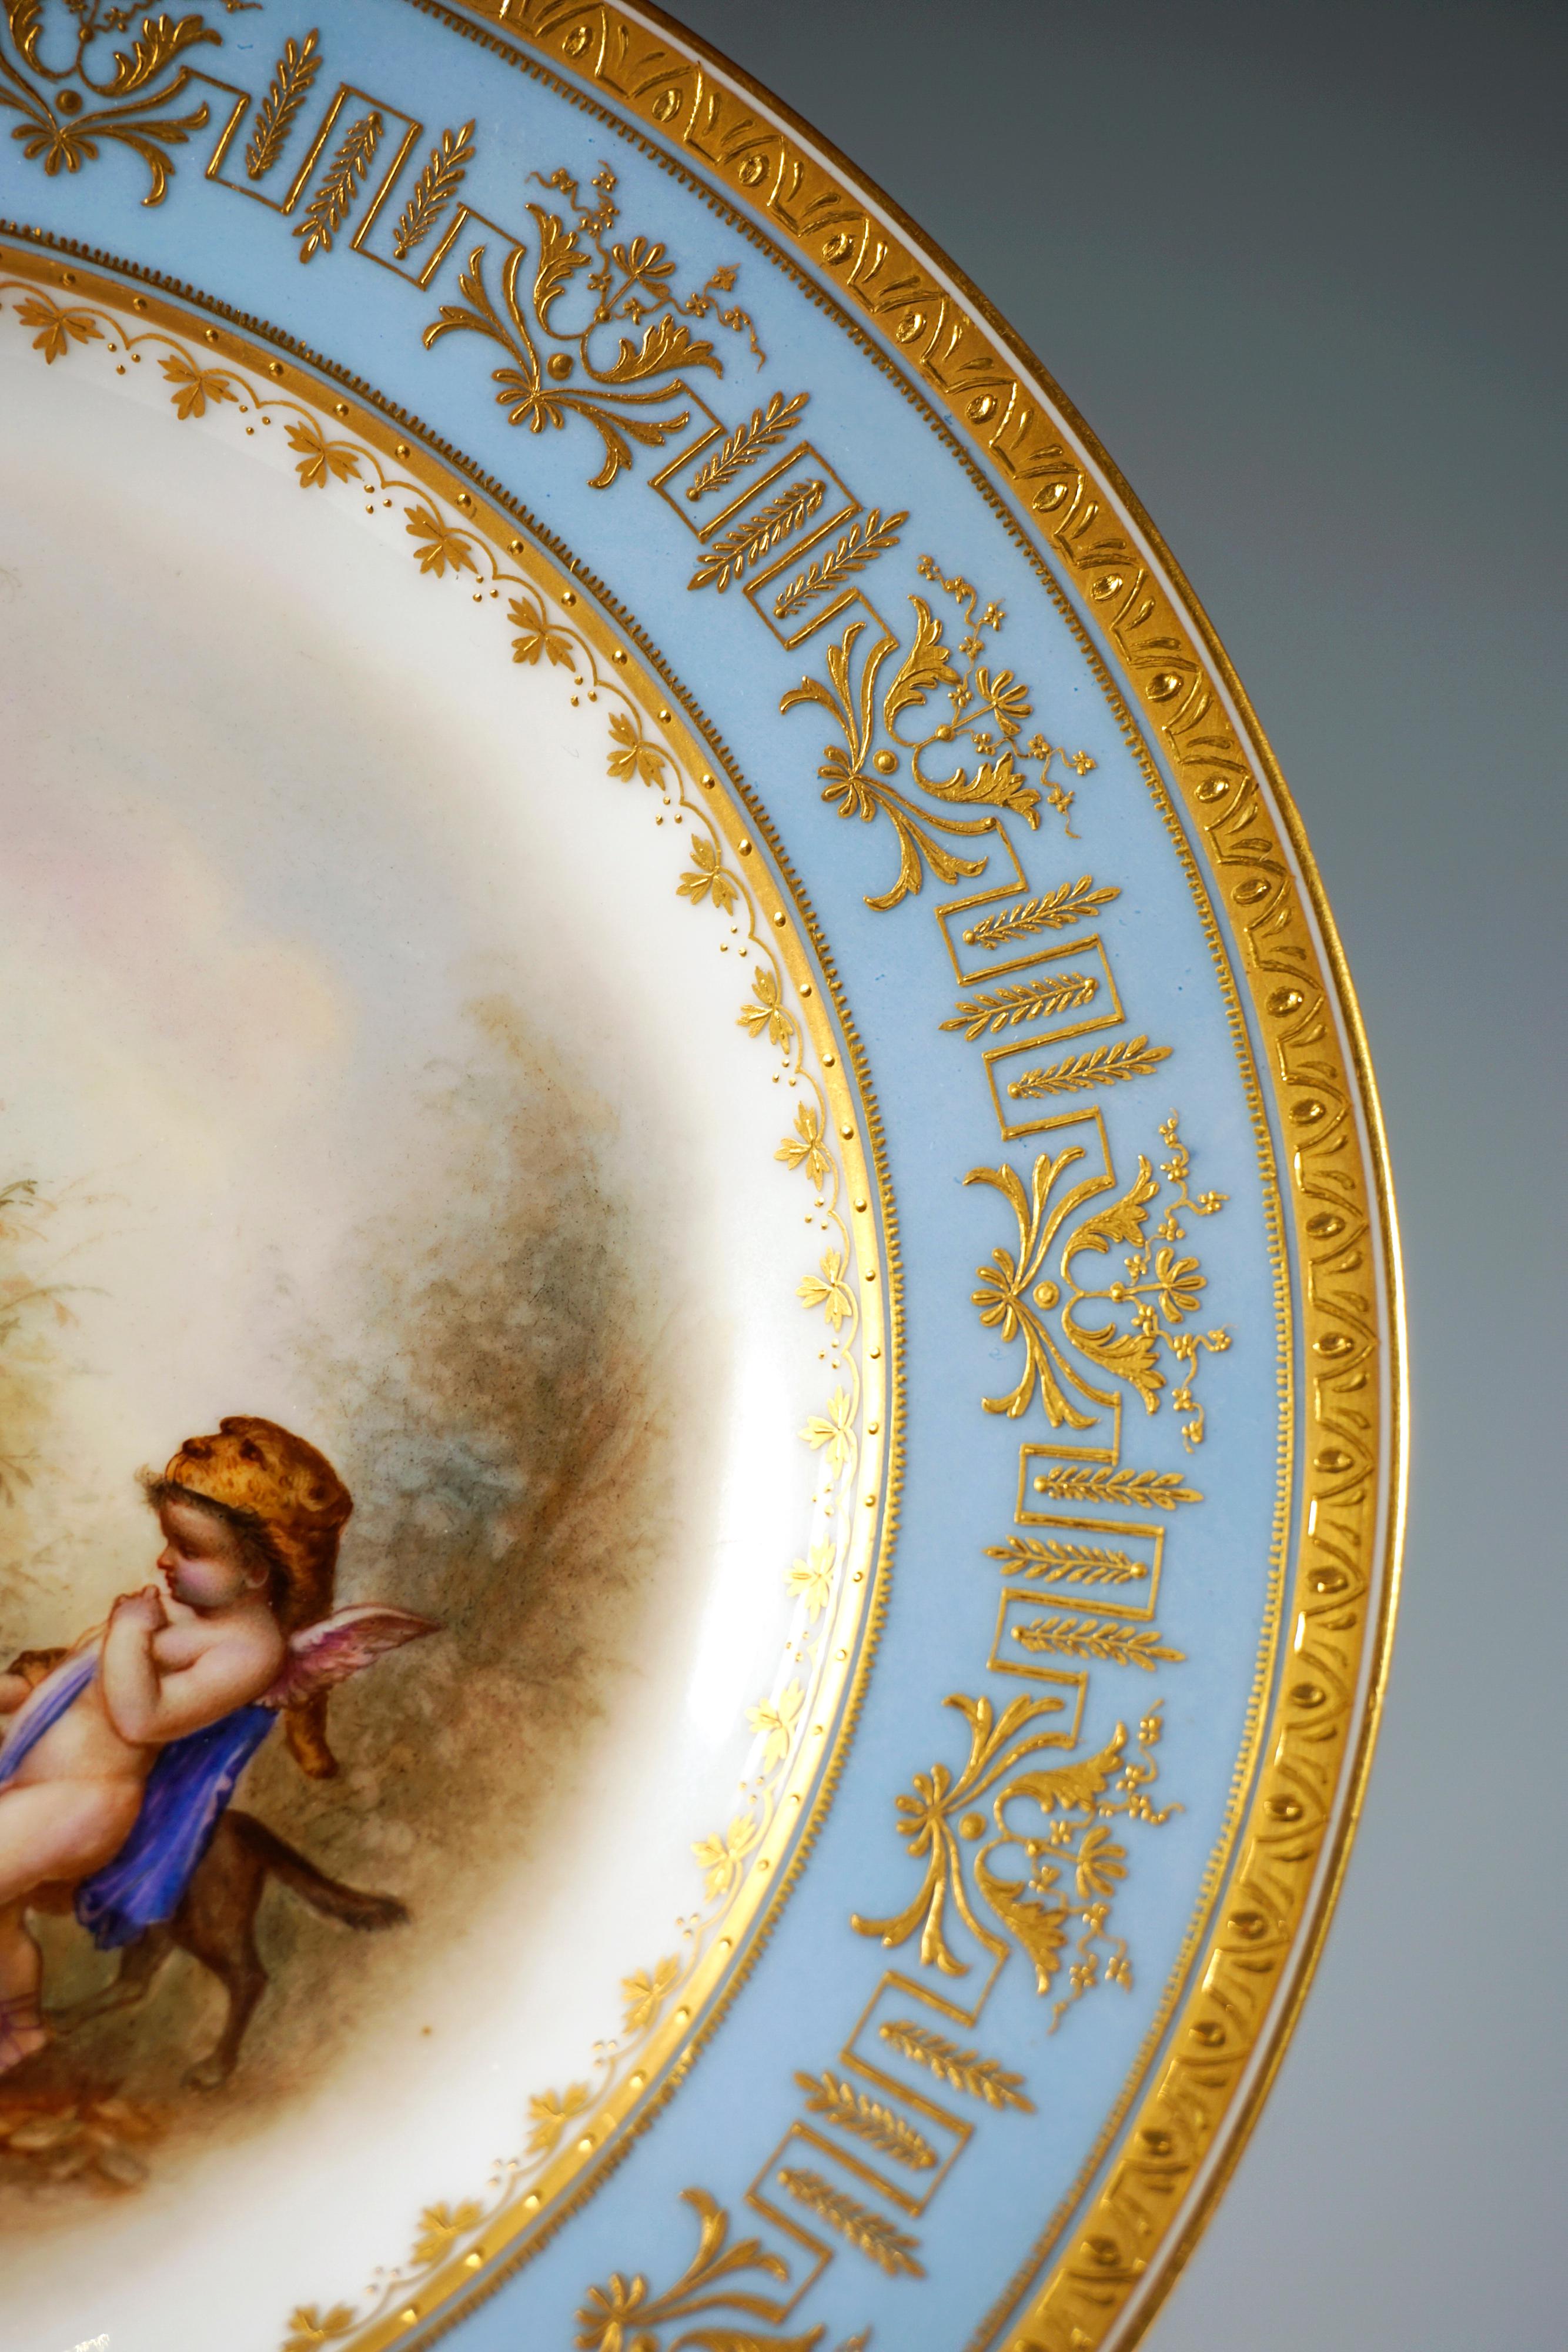 Austrian Viennese Imperial Porcelain Splendour Plate, Playing Cupids As Hunters, 1805 For Sale